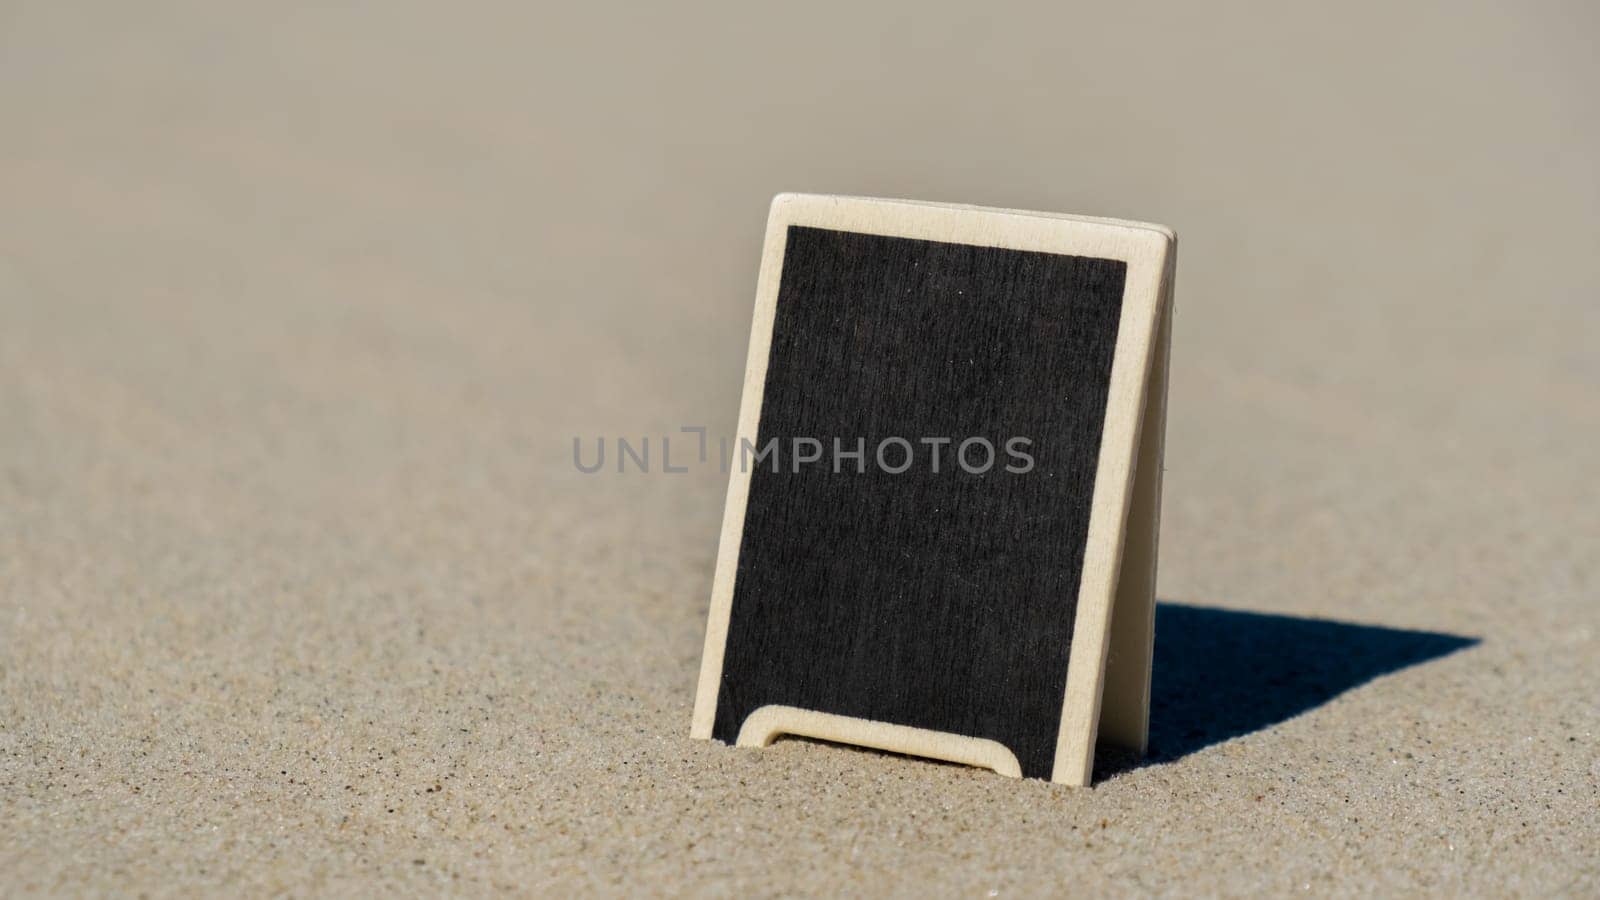 Empty blackboard frame board with copy space for your text or design displays on sandy beach. Summer vacation and holiday business travel concept. Template Mock up for sale promotion advertisement. Travelling, trip Chalkboard